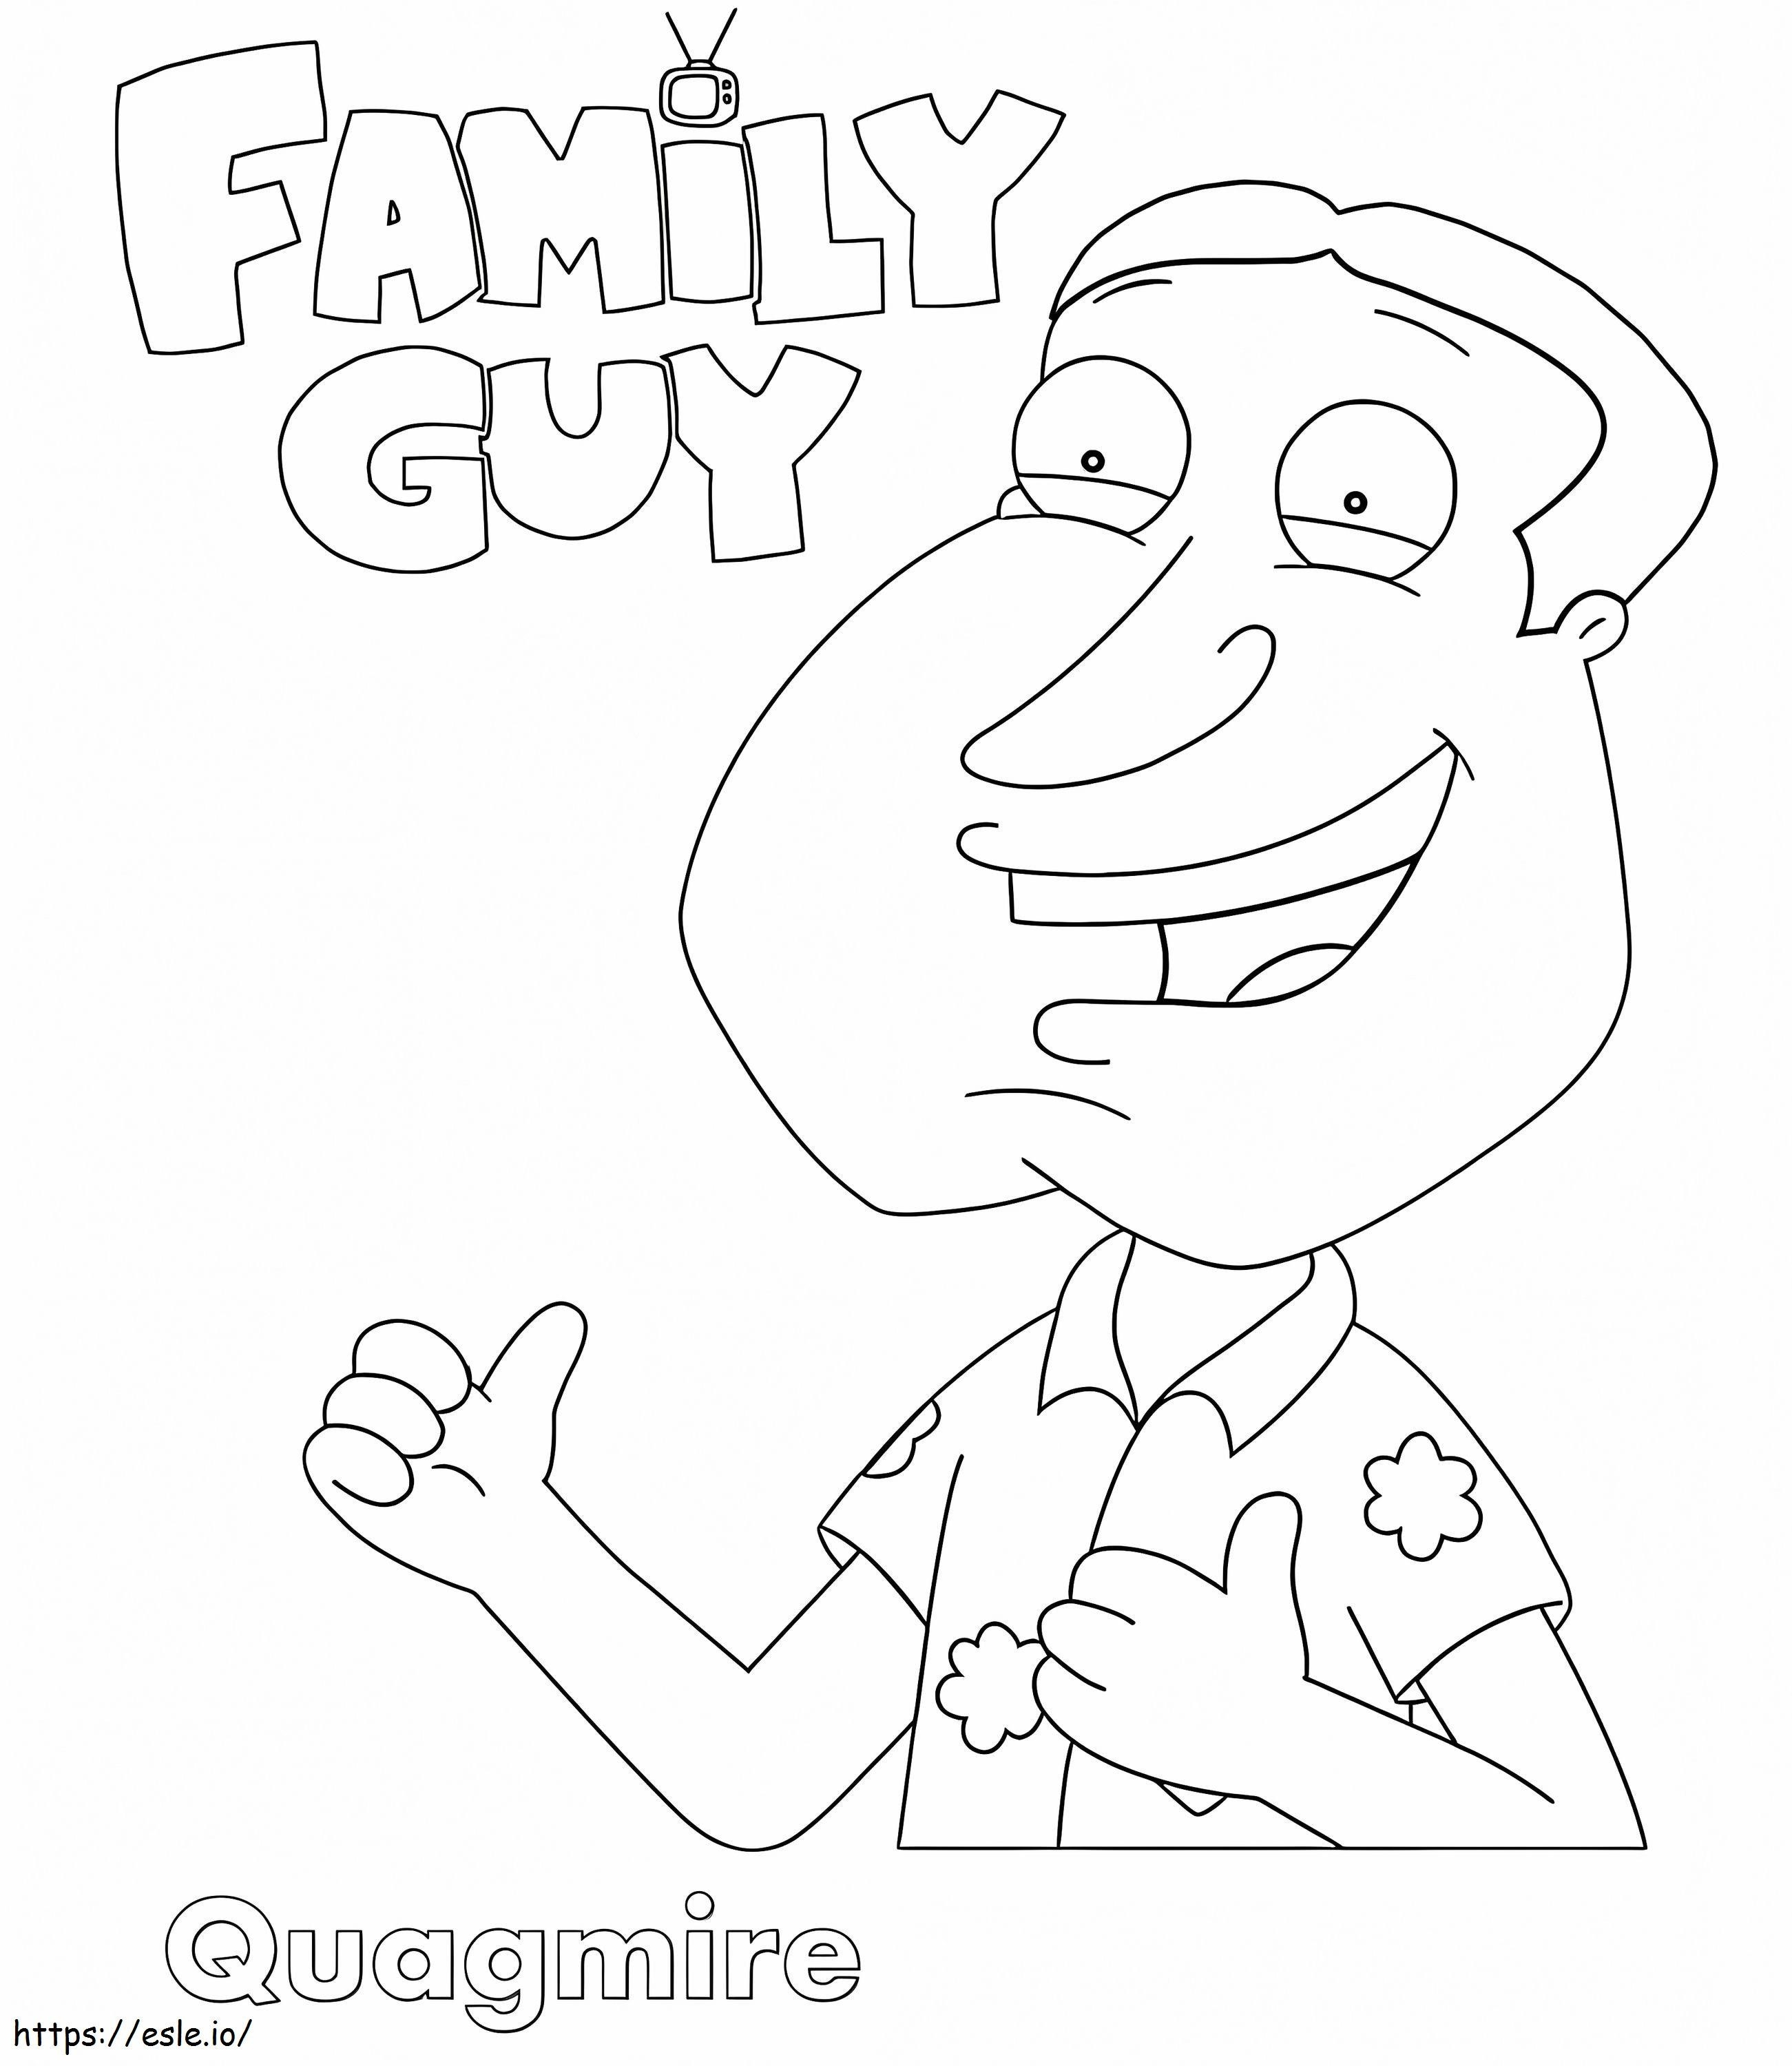 Quagmire Family Guy coloring page